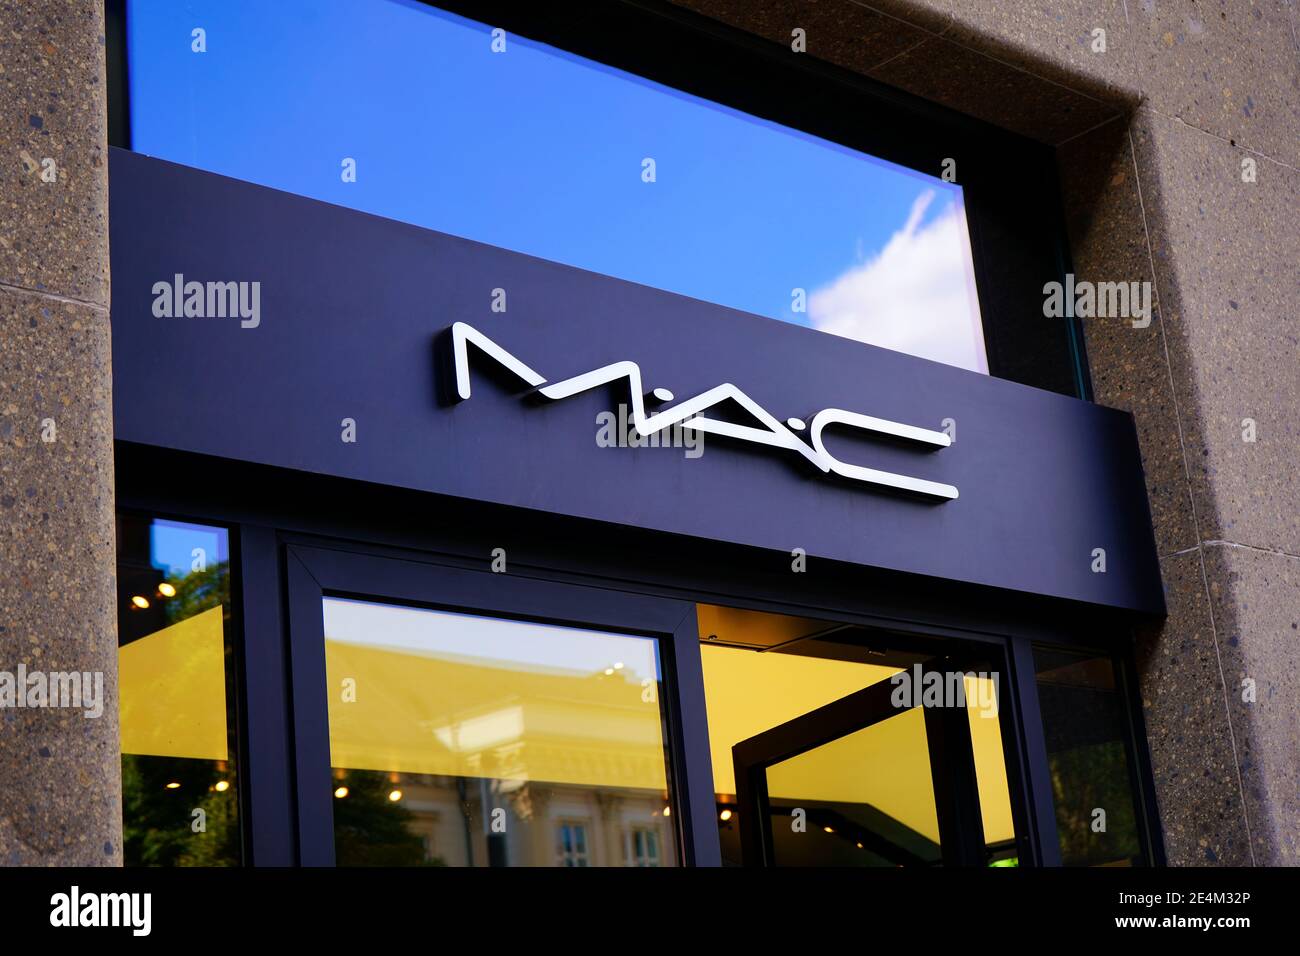 Exterior logo of a Canadian MAC cosmetics (M•A•C) store in downtown Düsseldorf. MAC is an acronym for 'Make-up Art Cosmetics'. Stock Photo